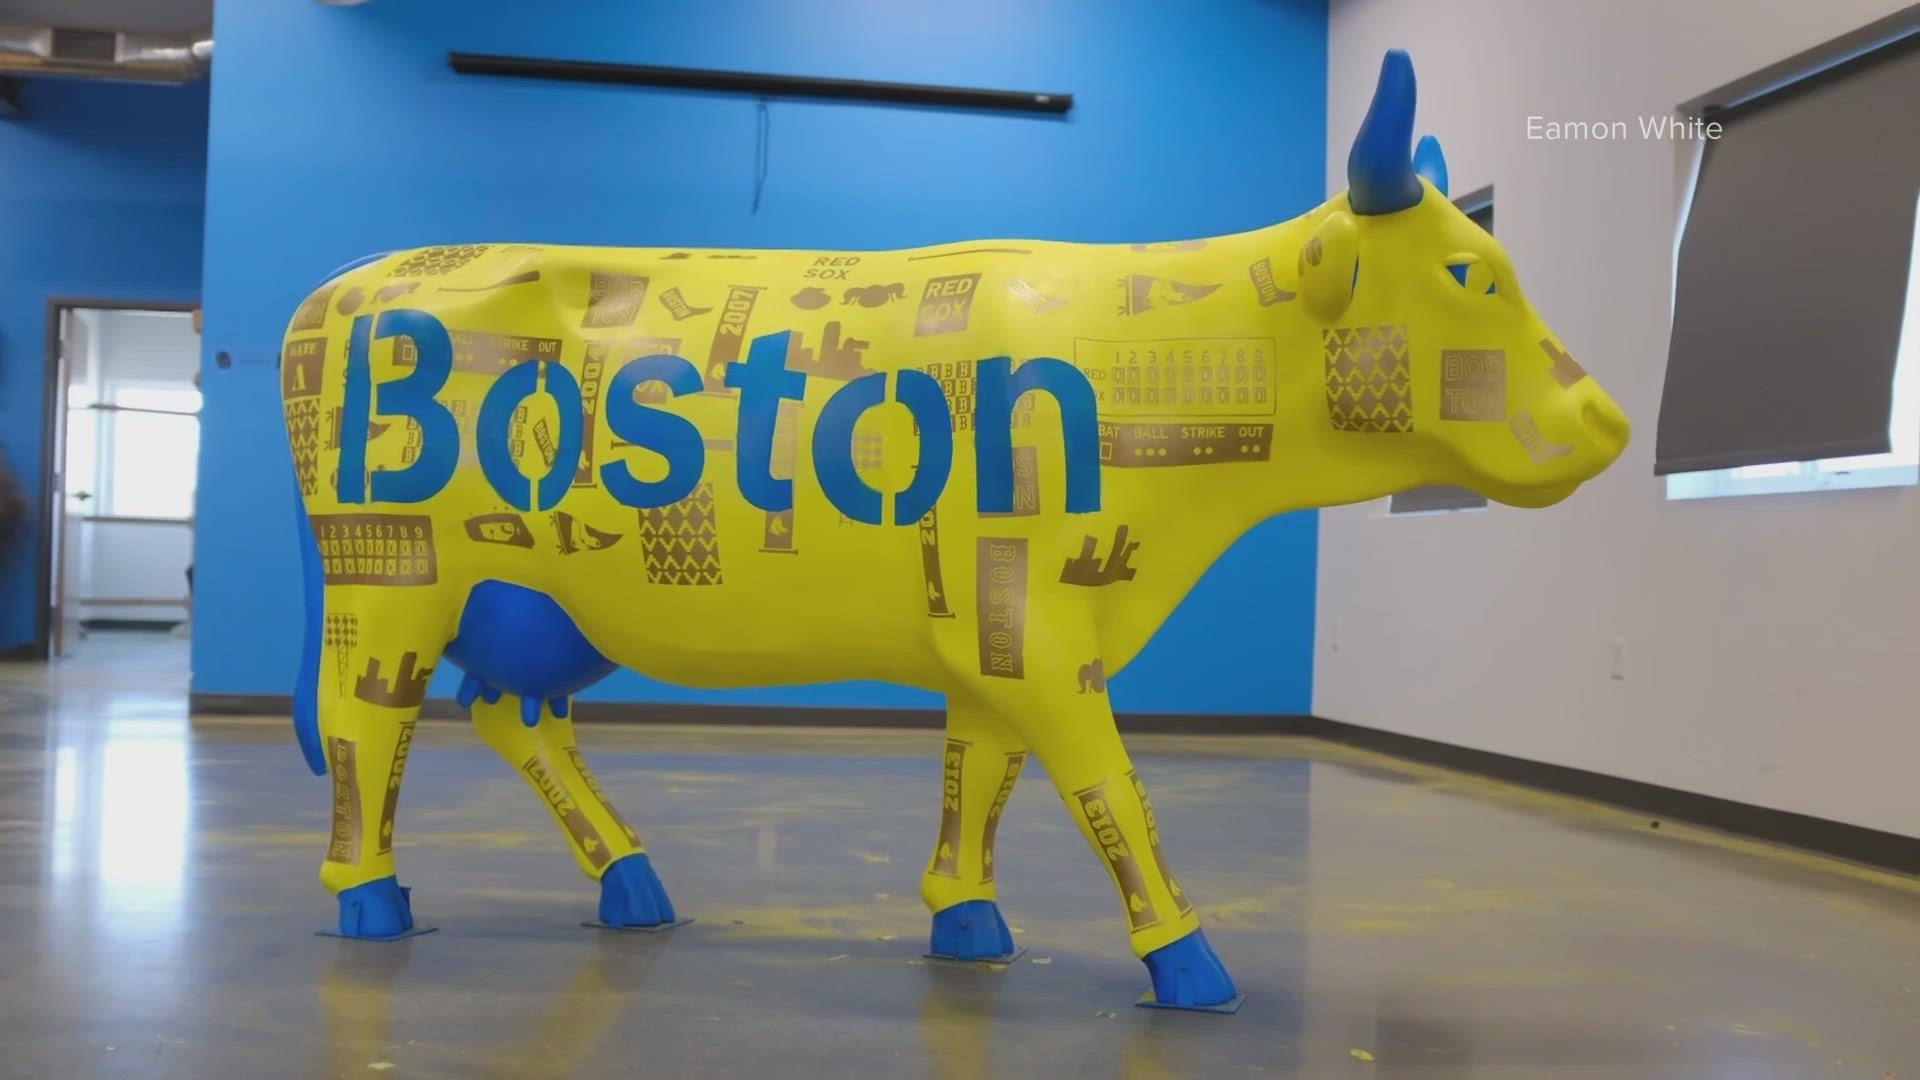 Two Maine artists have painted cow sculptures for the Cow Parade New England, which is raising money for the Dana-Farber Cancer Institute.